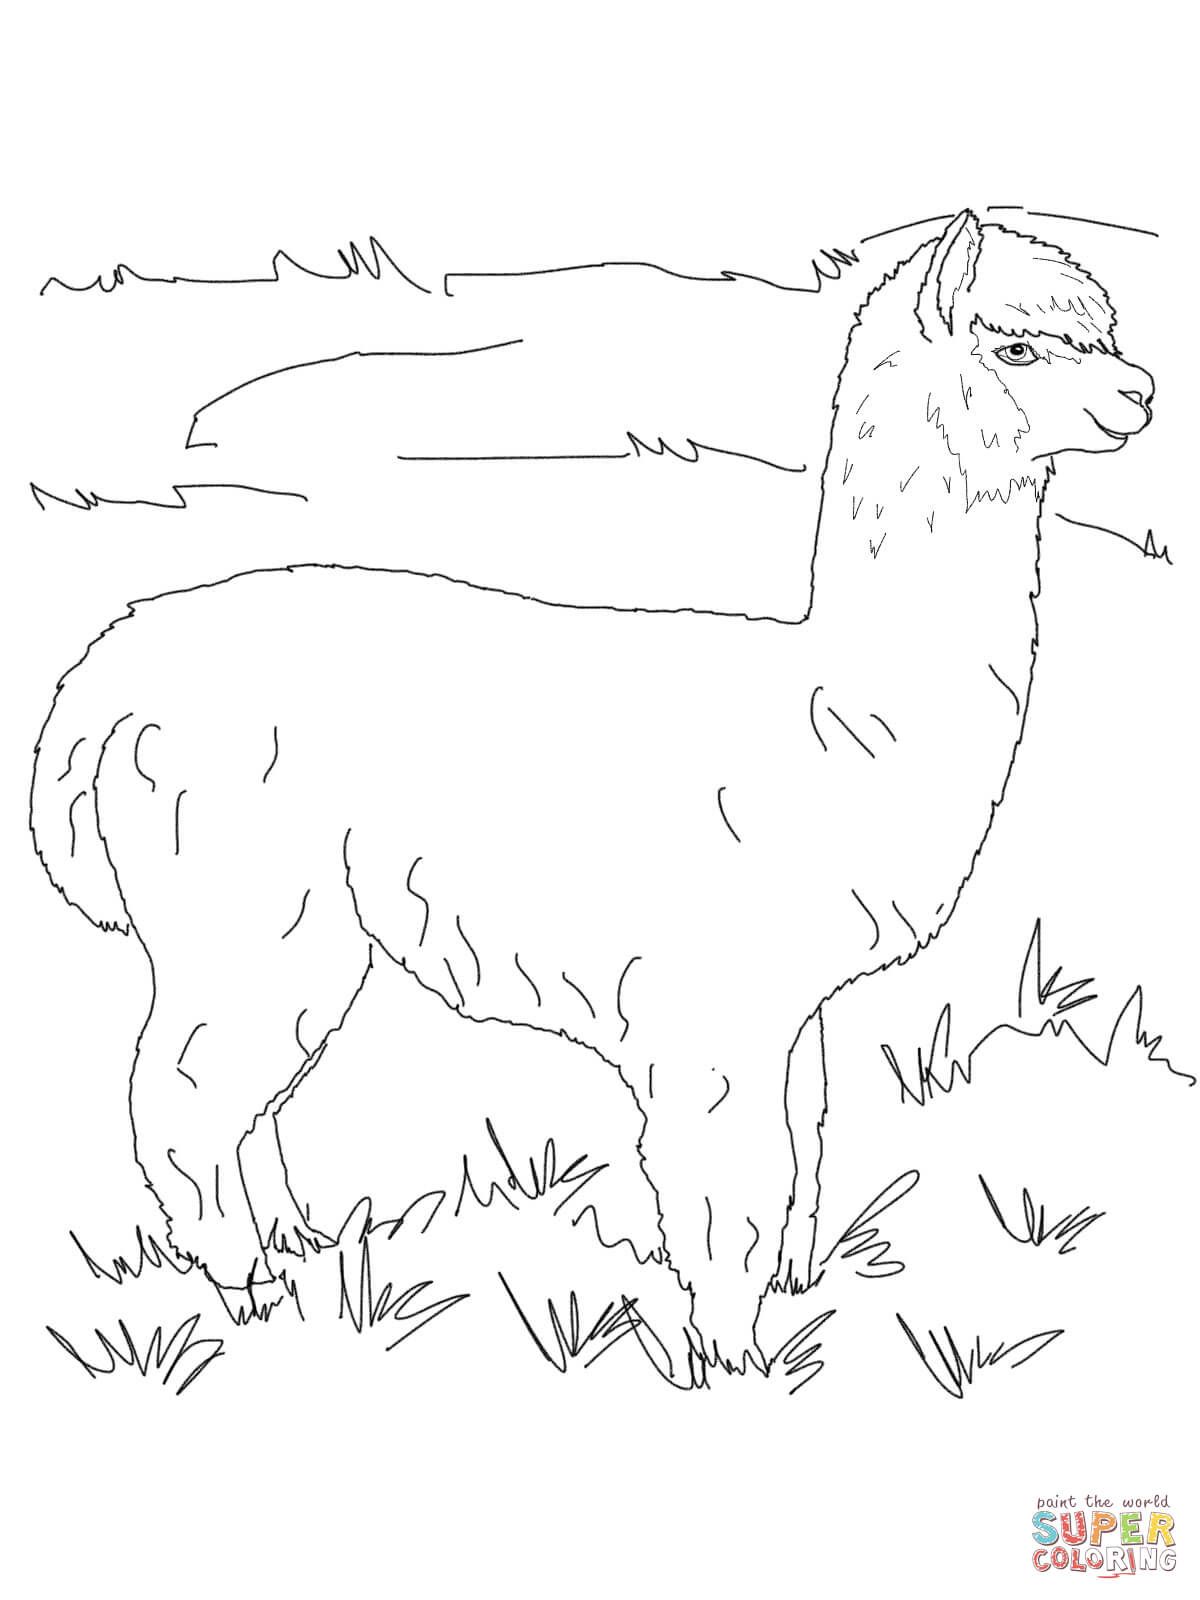 Alpaca coloring pages | Free Coloring Pages | Coloring book art, Coloring  pages, Alpaca